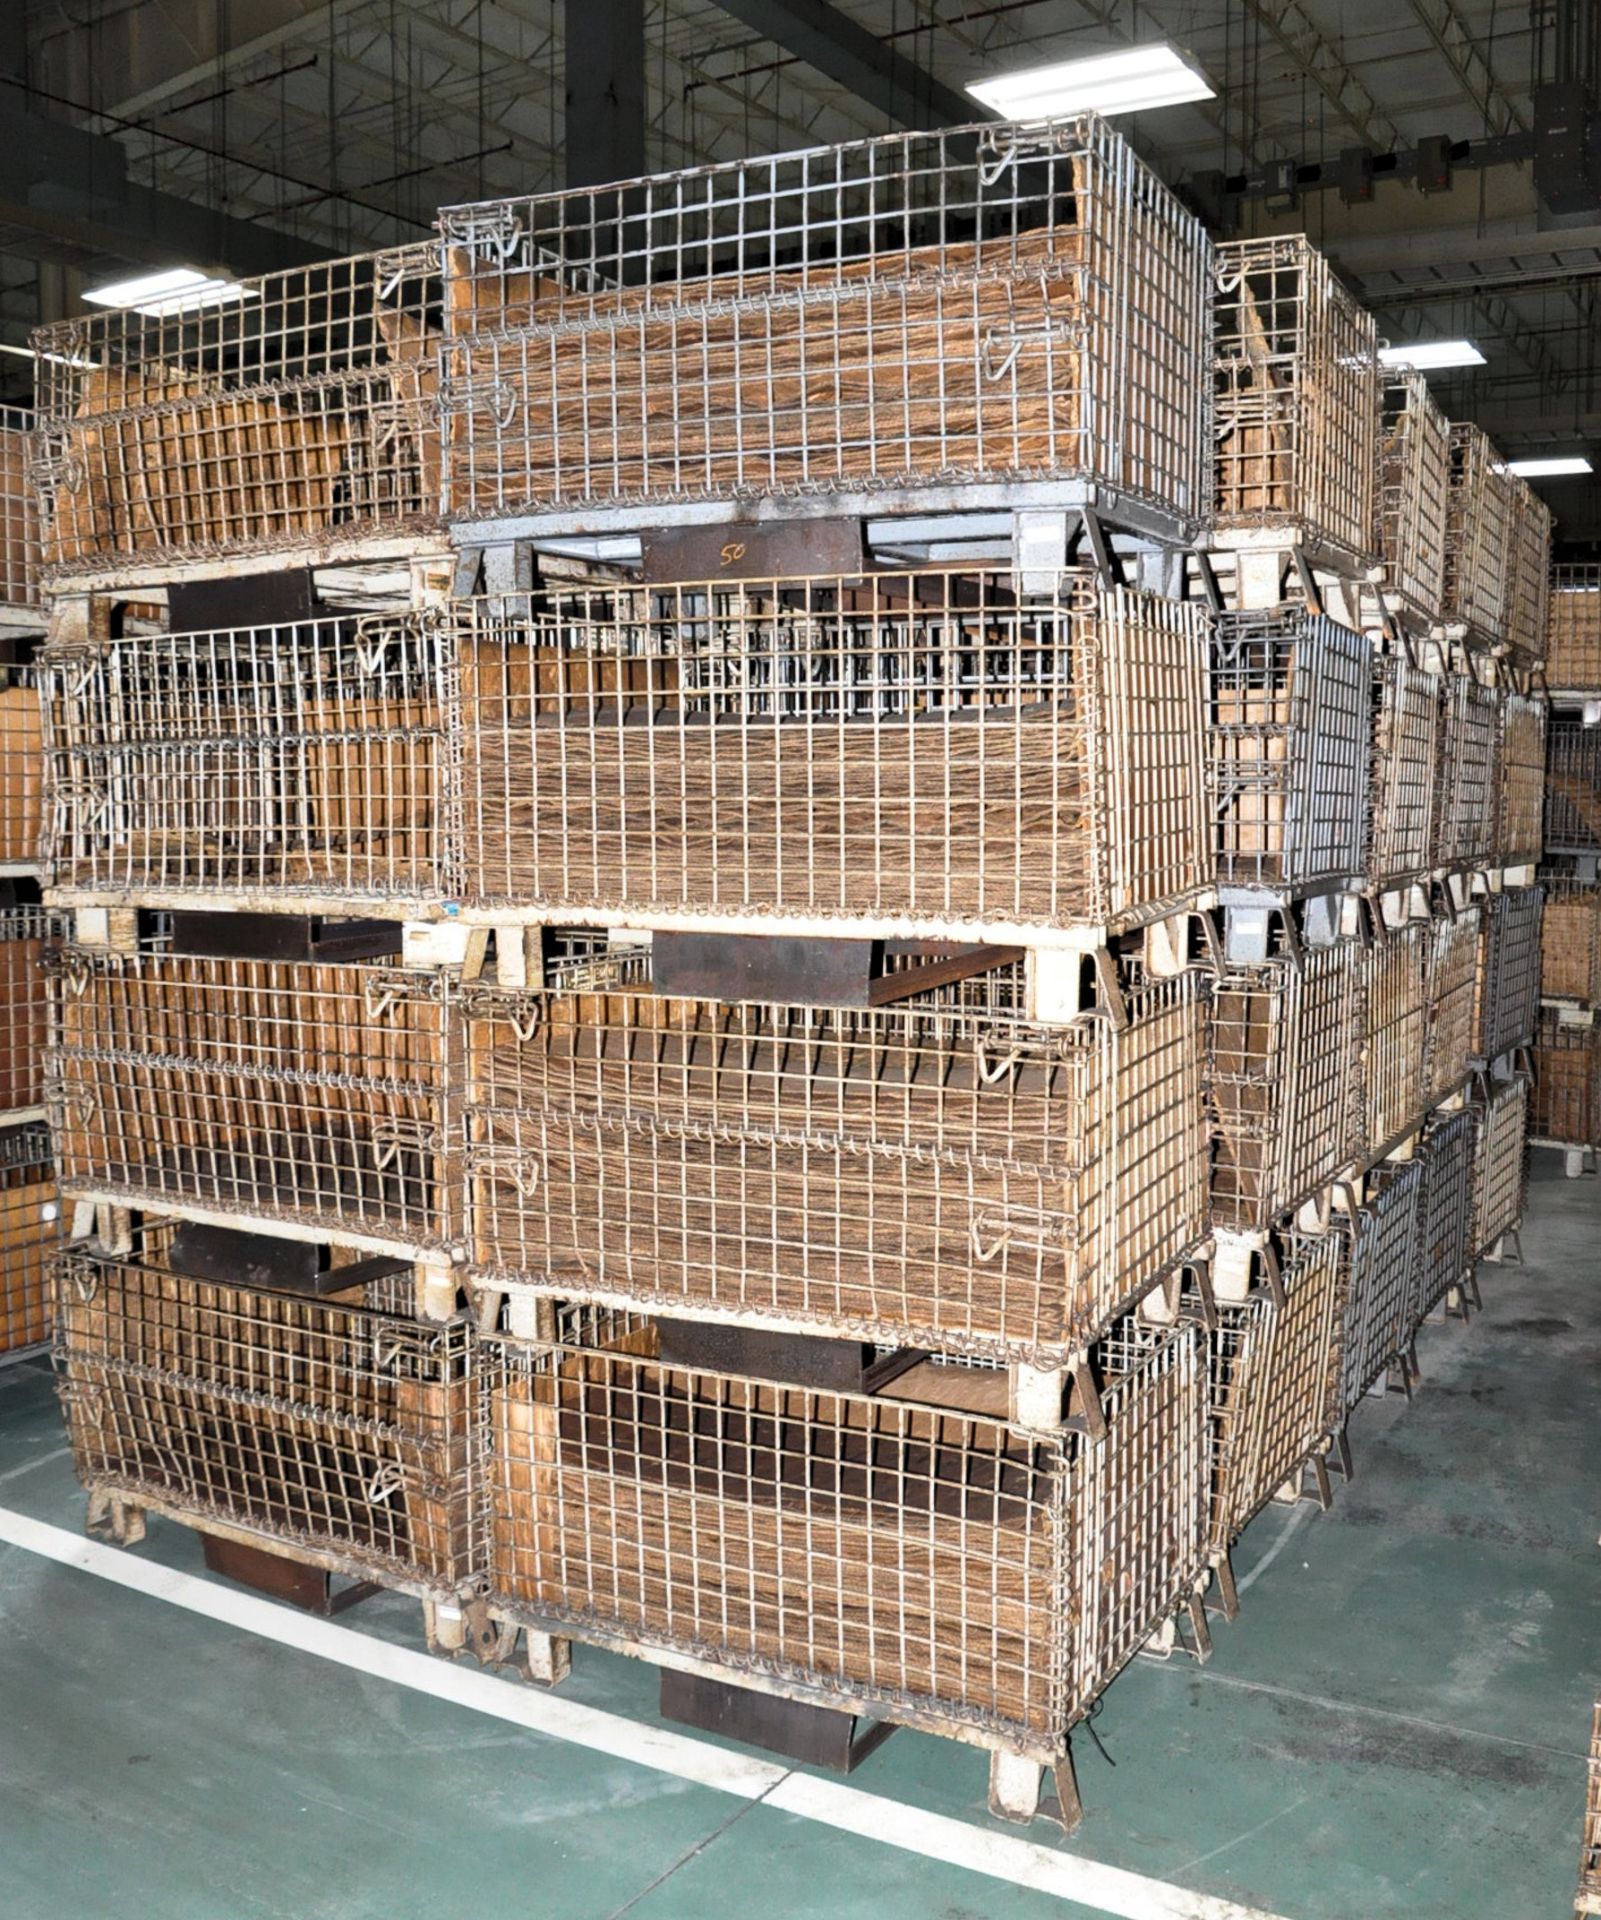 Lot-(40) 40" x 30" x 18"H Steel Wire Baskets in (1) Group, (D-12)